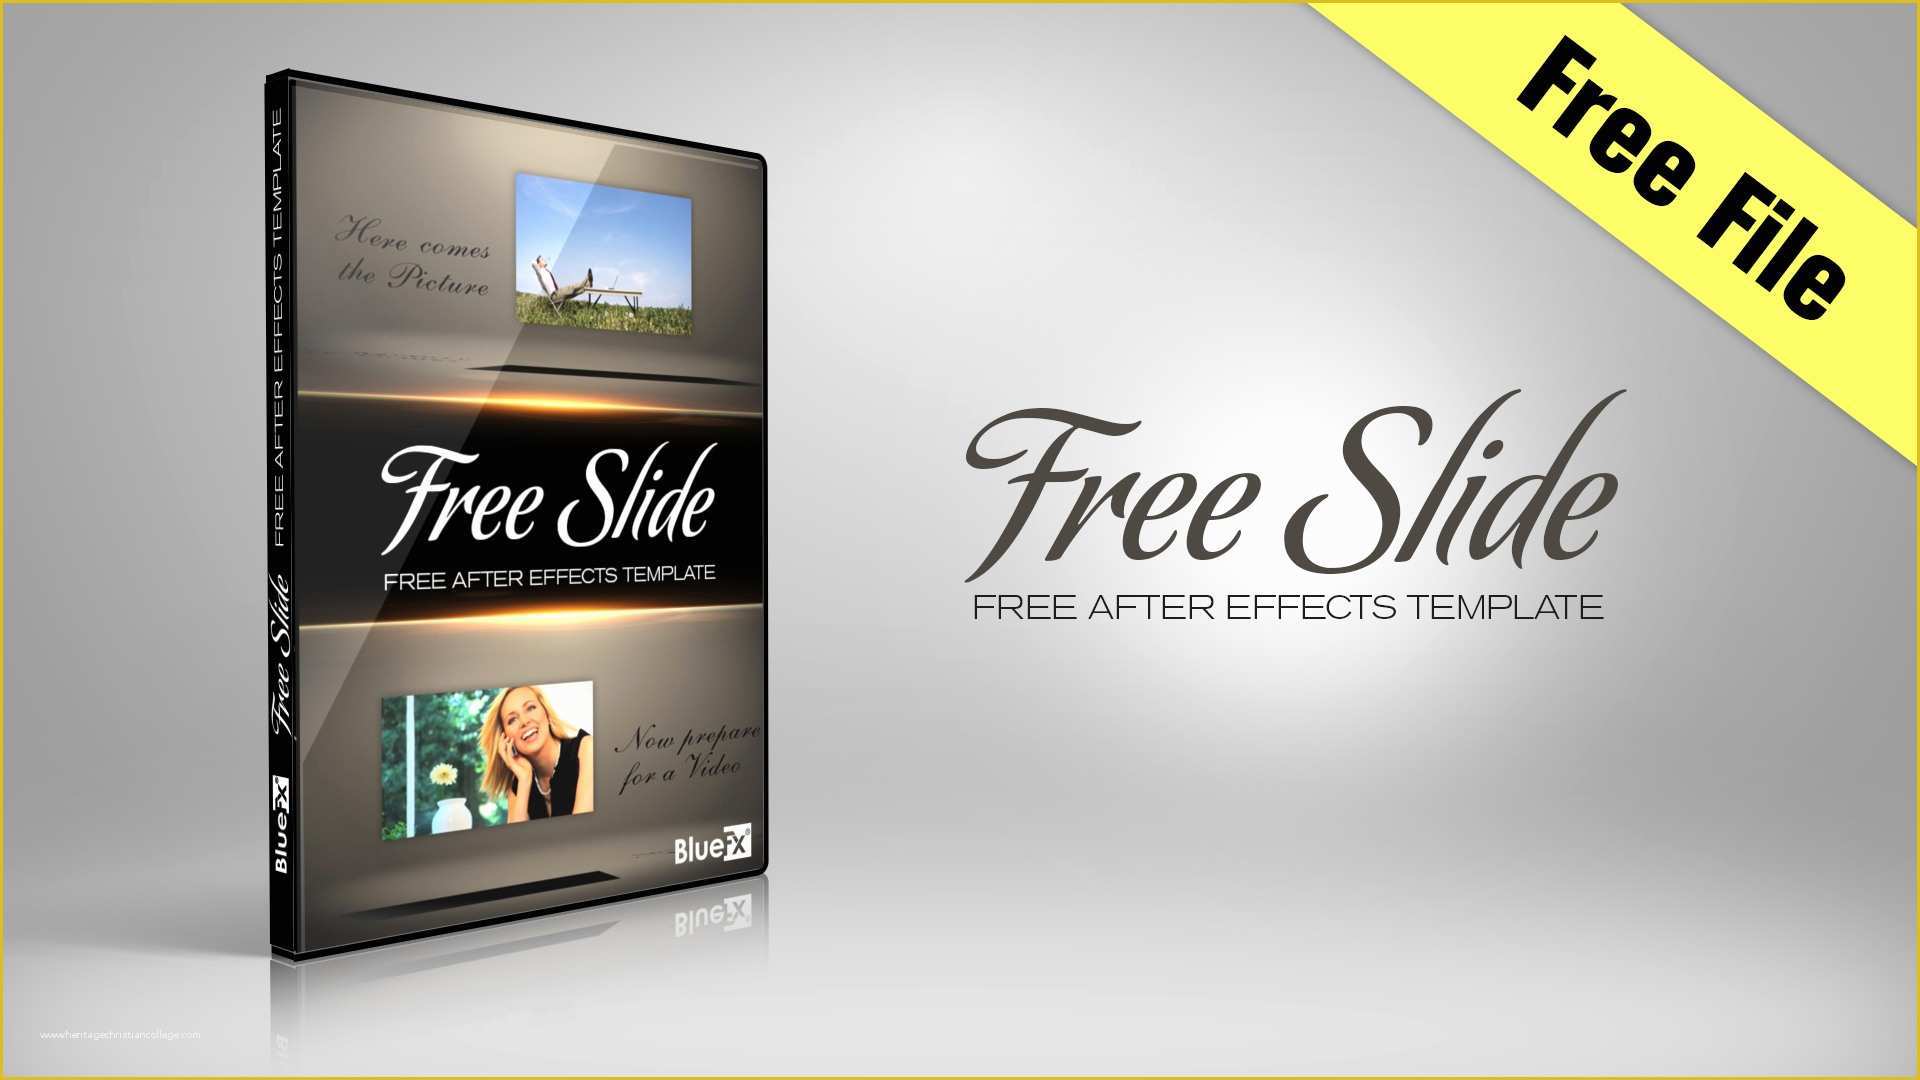 After Effects Templates Free Download Cs6 Of after Effects Slideshow Template Free